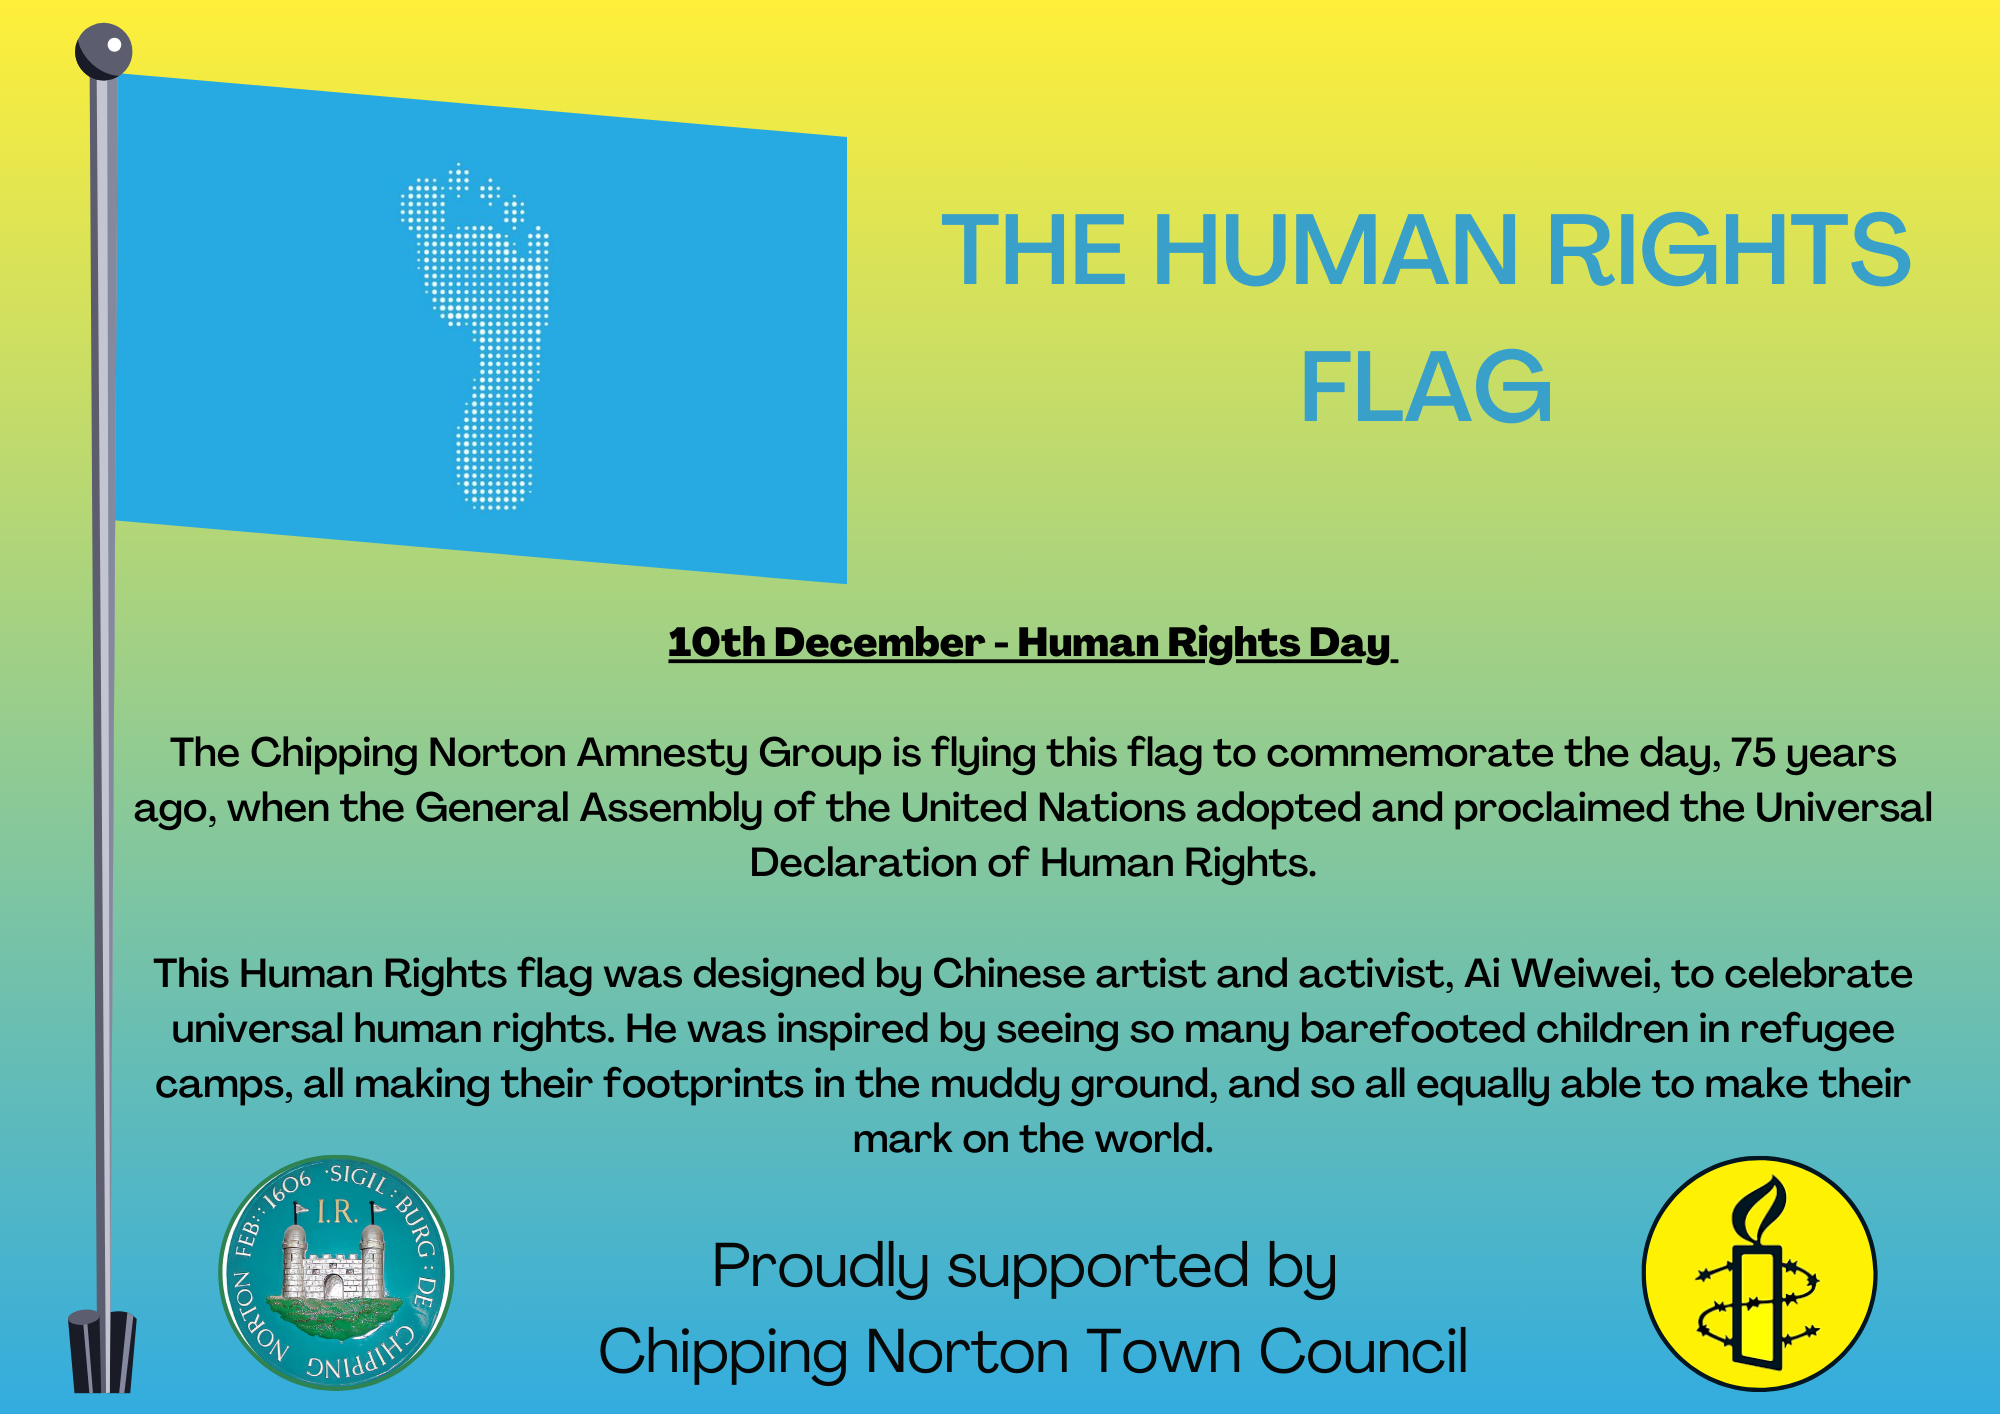 
10th December - Human Rights Day 

The Chipping Norton Amnesty Group is flying this flag to commemorate the day, 75 years ago, when the General Assembly of the United Nations adopted and proclaimed the Universal Declaration of Human Rights.

This Human Rights flag was designed by Chinese artist and activist, Ai Weiwei, to celebrate universal human rights. He was inspired by seeing so many barefooted children in refugee camps, all making their footprints in the muddy ground, and so all equally able to make their mark on the world.